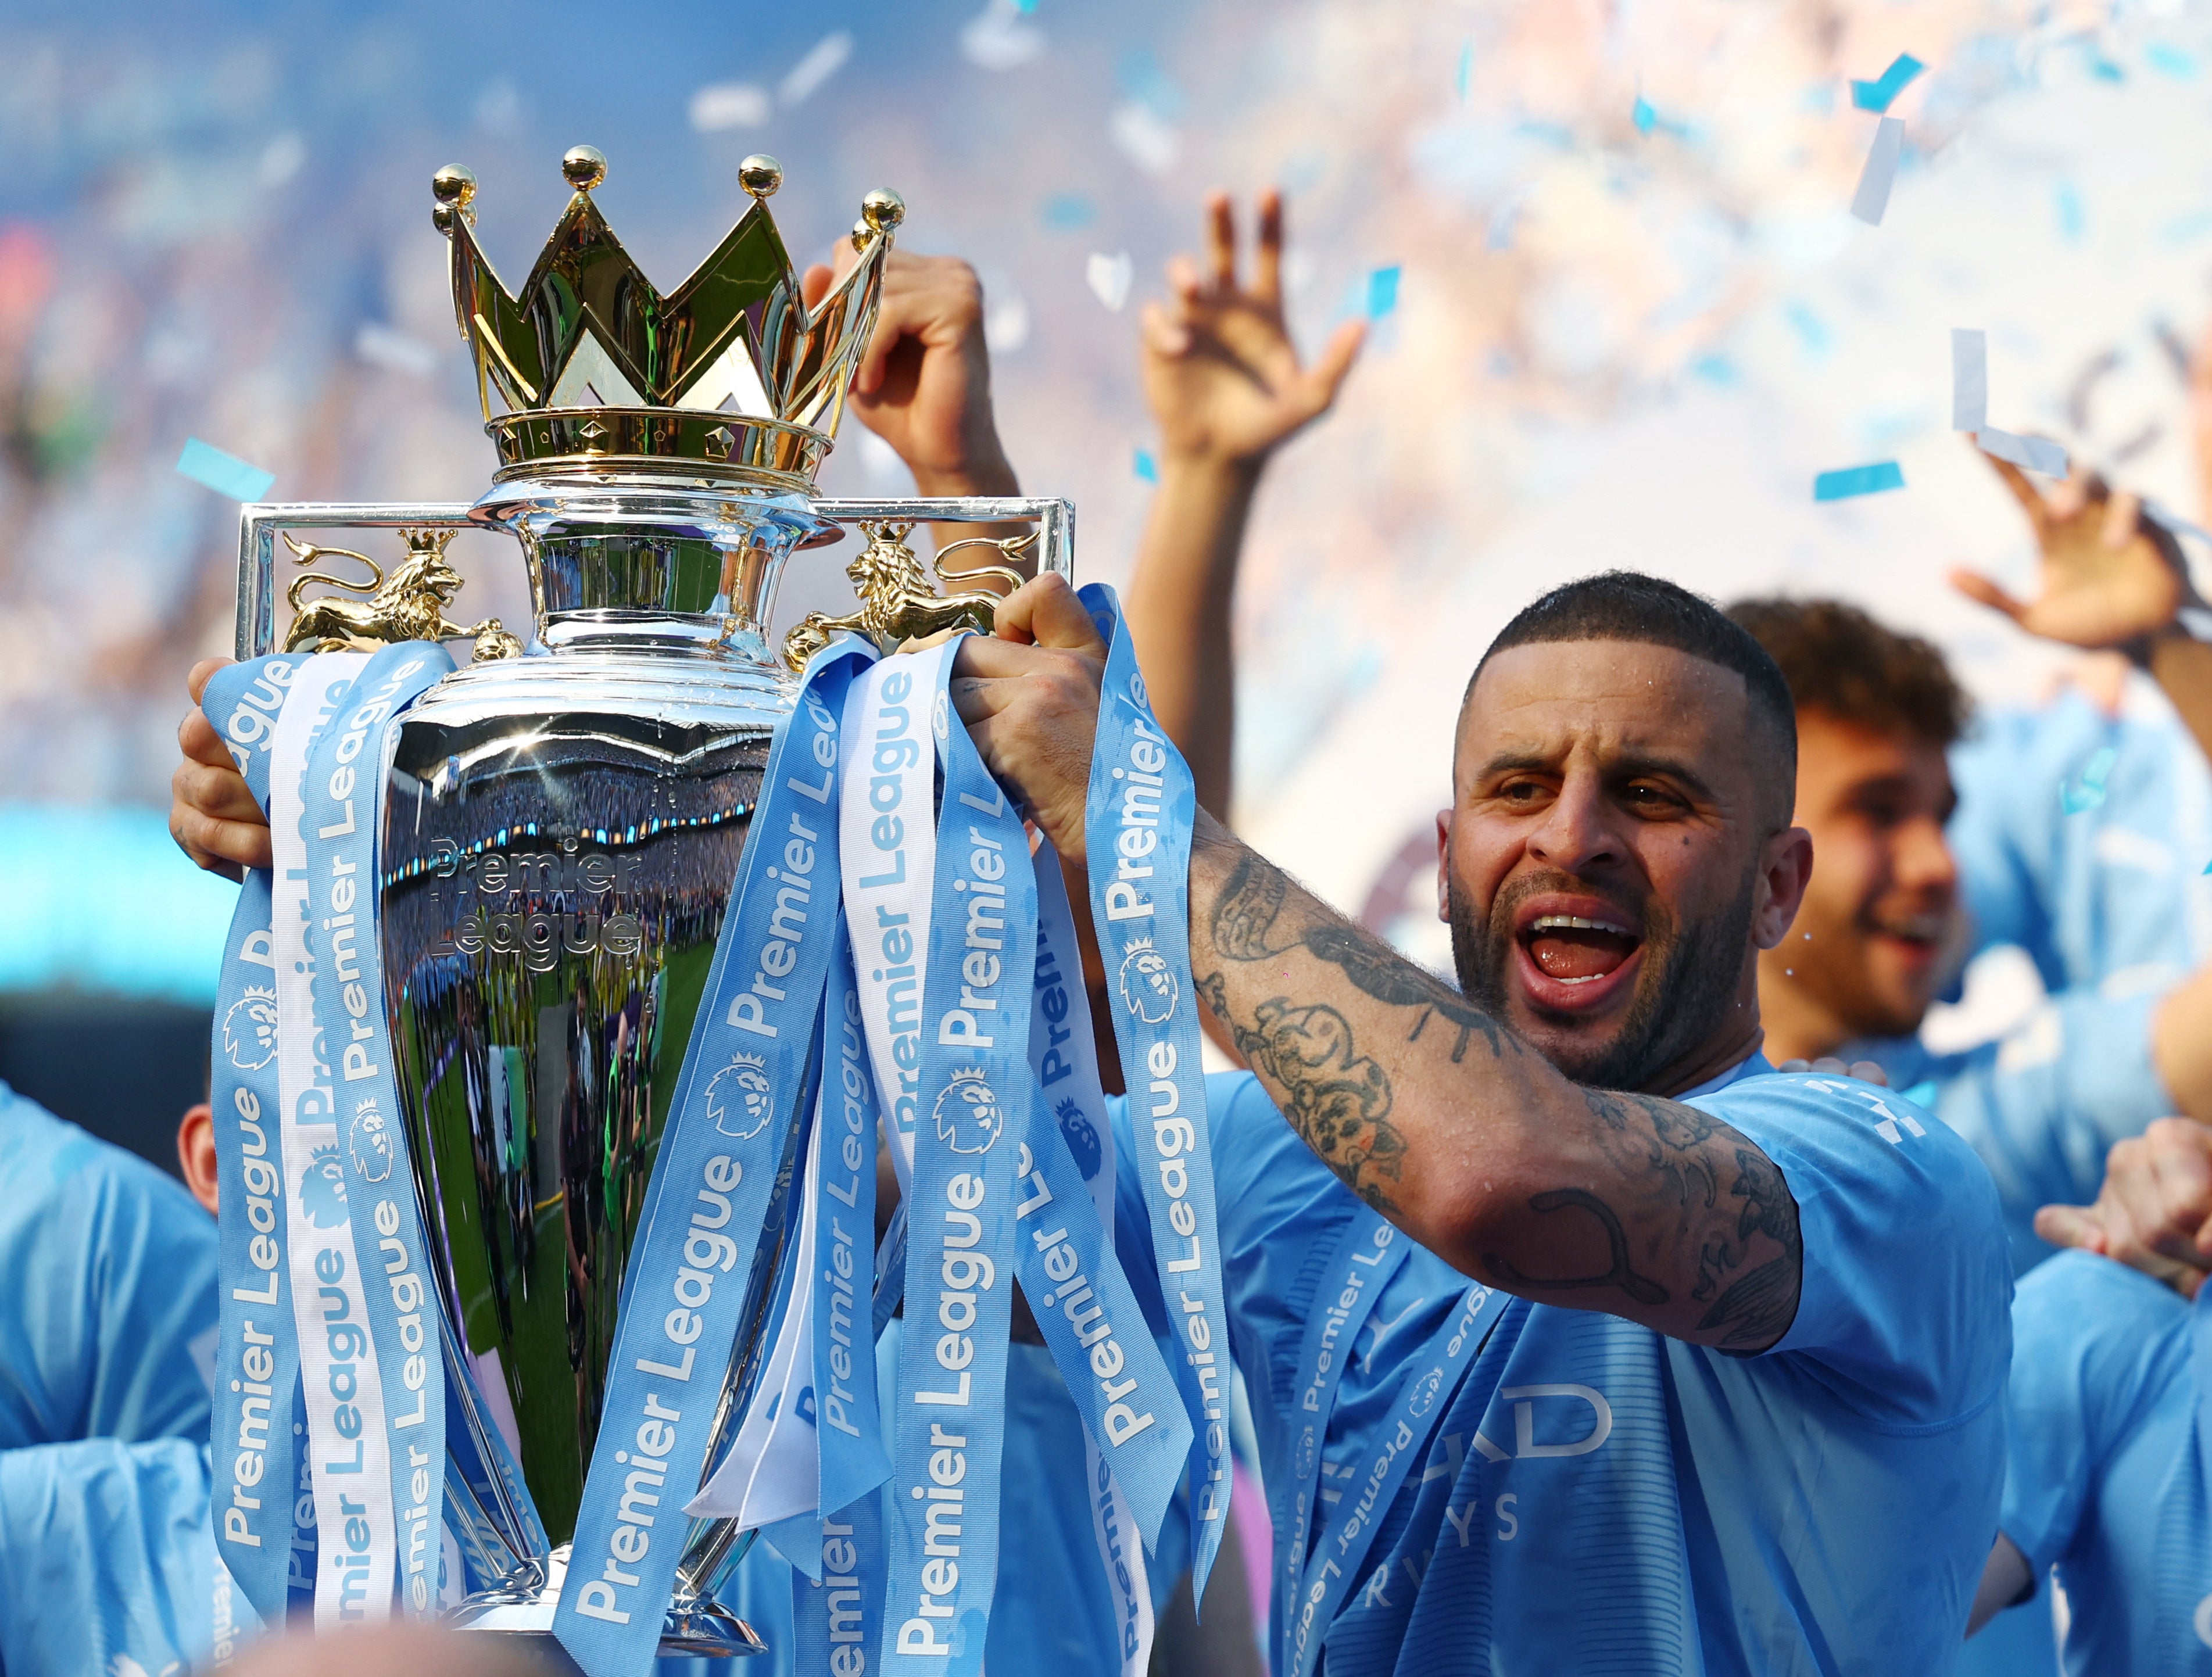 Kyle Walker will try to lift another trophy this weekend